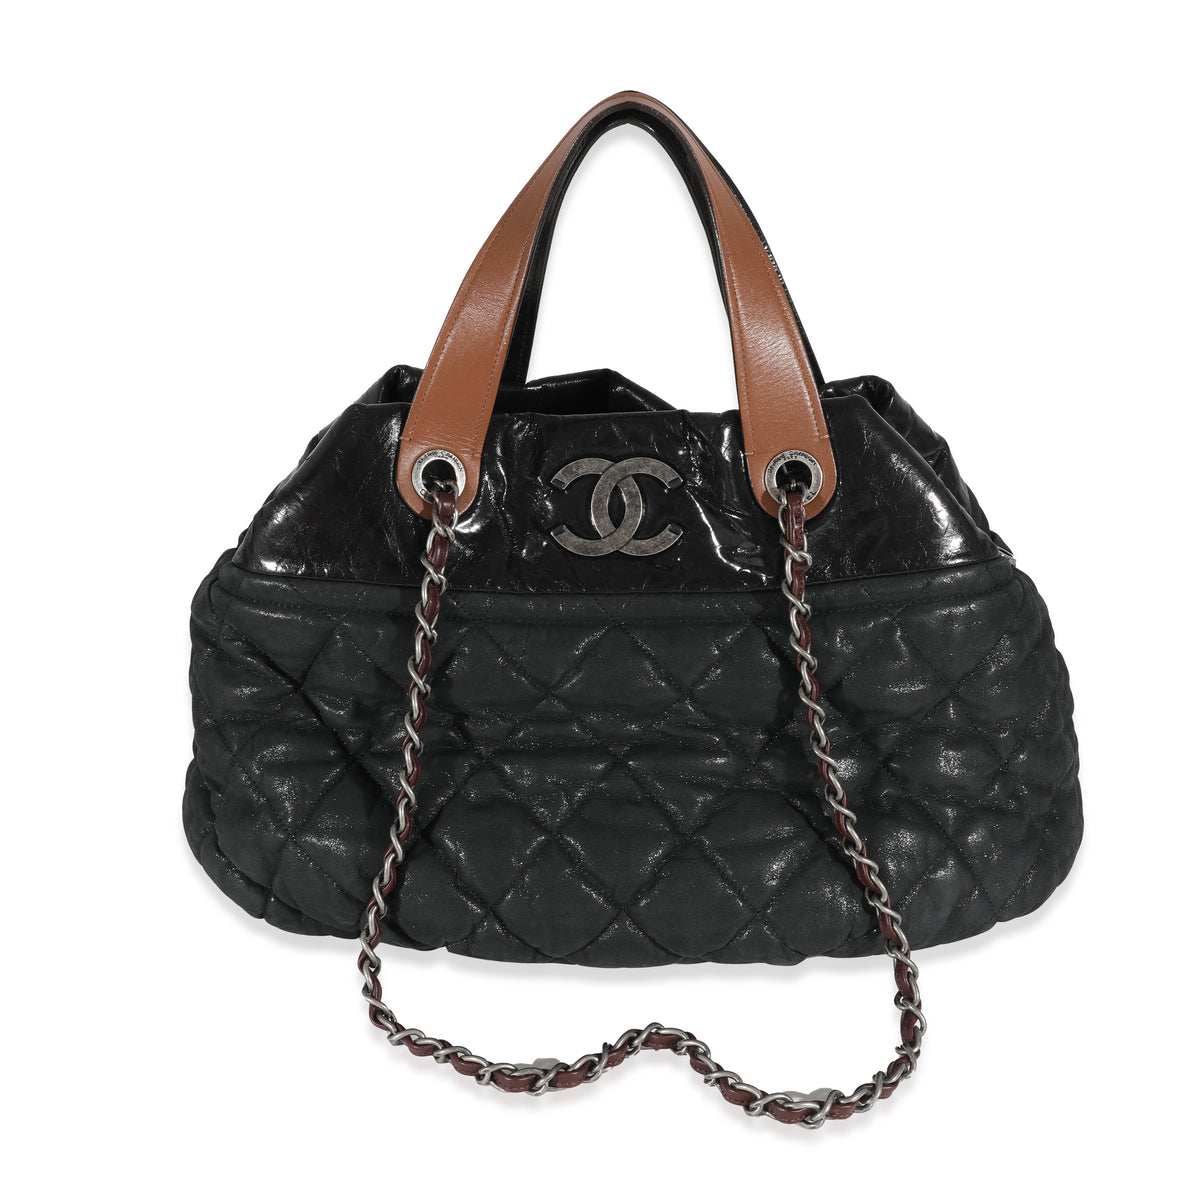 Chanel Black Iridescent Calfskin Quilted In The Mix Tote, myGemma, CH